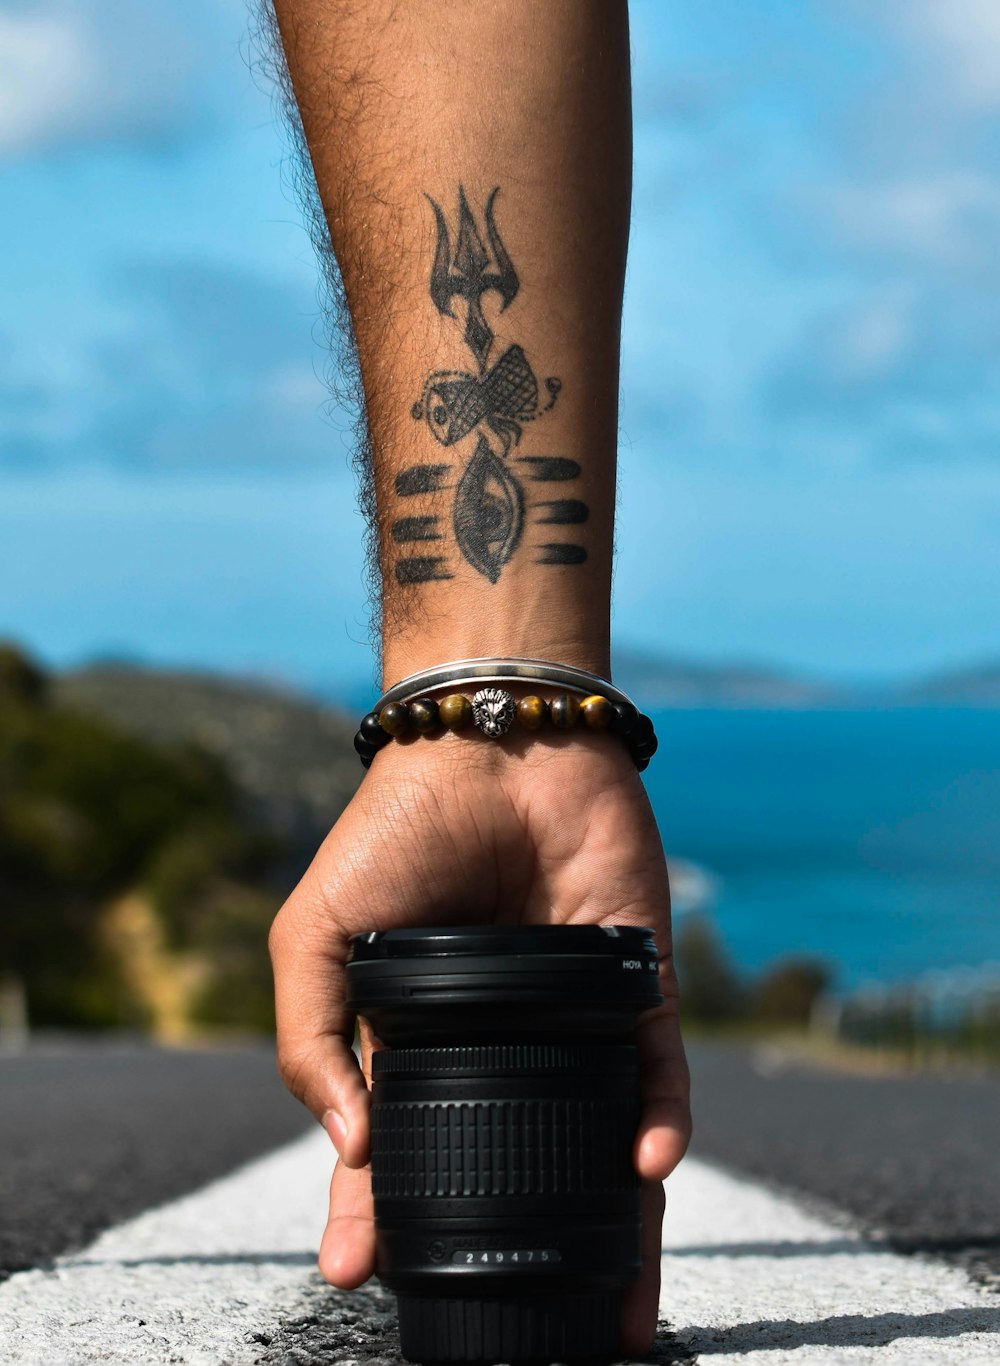 person with black and brown tattoo on arm photo – Free Wilsons promontory  vic Image on Unsplash